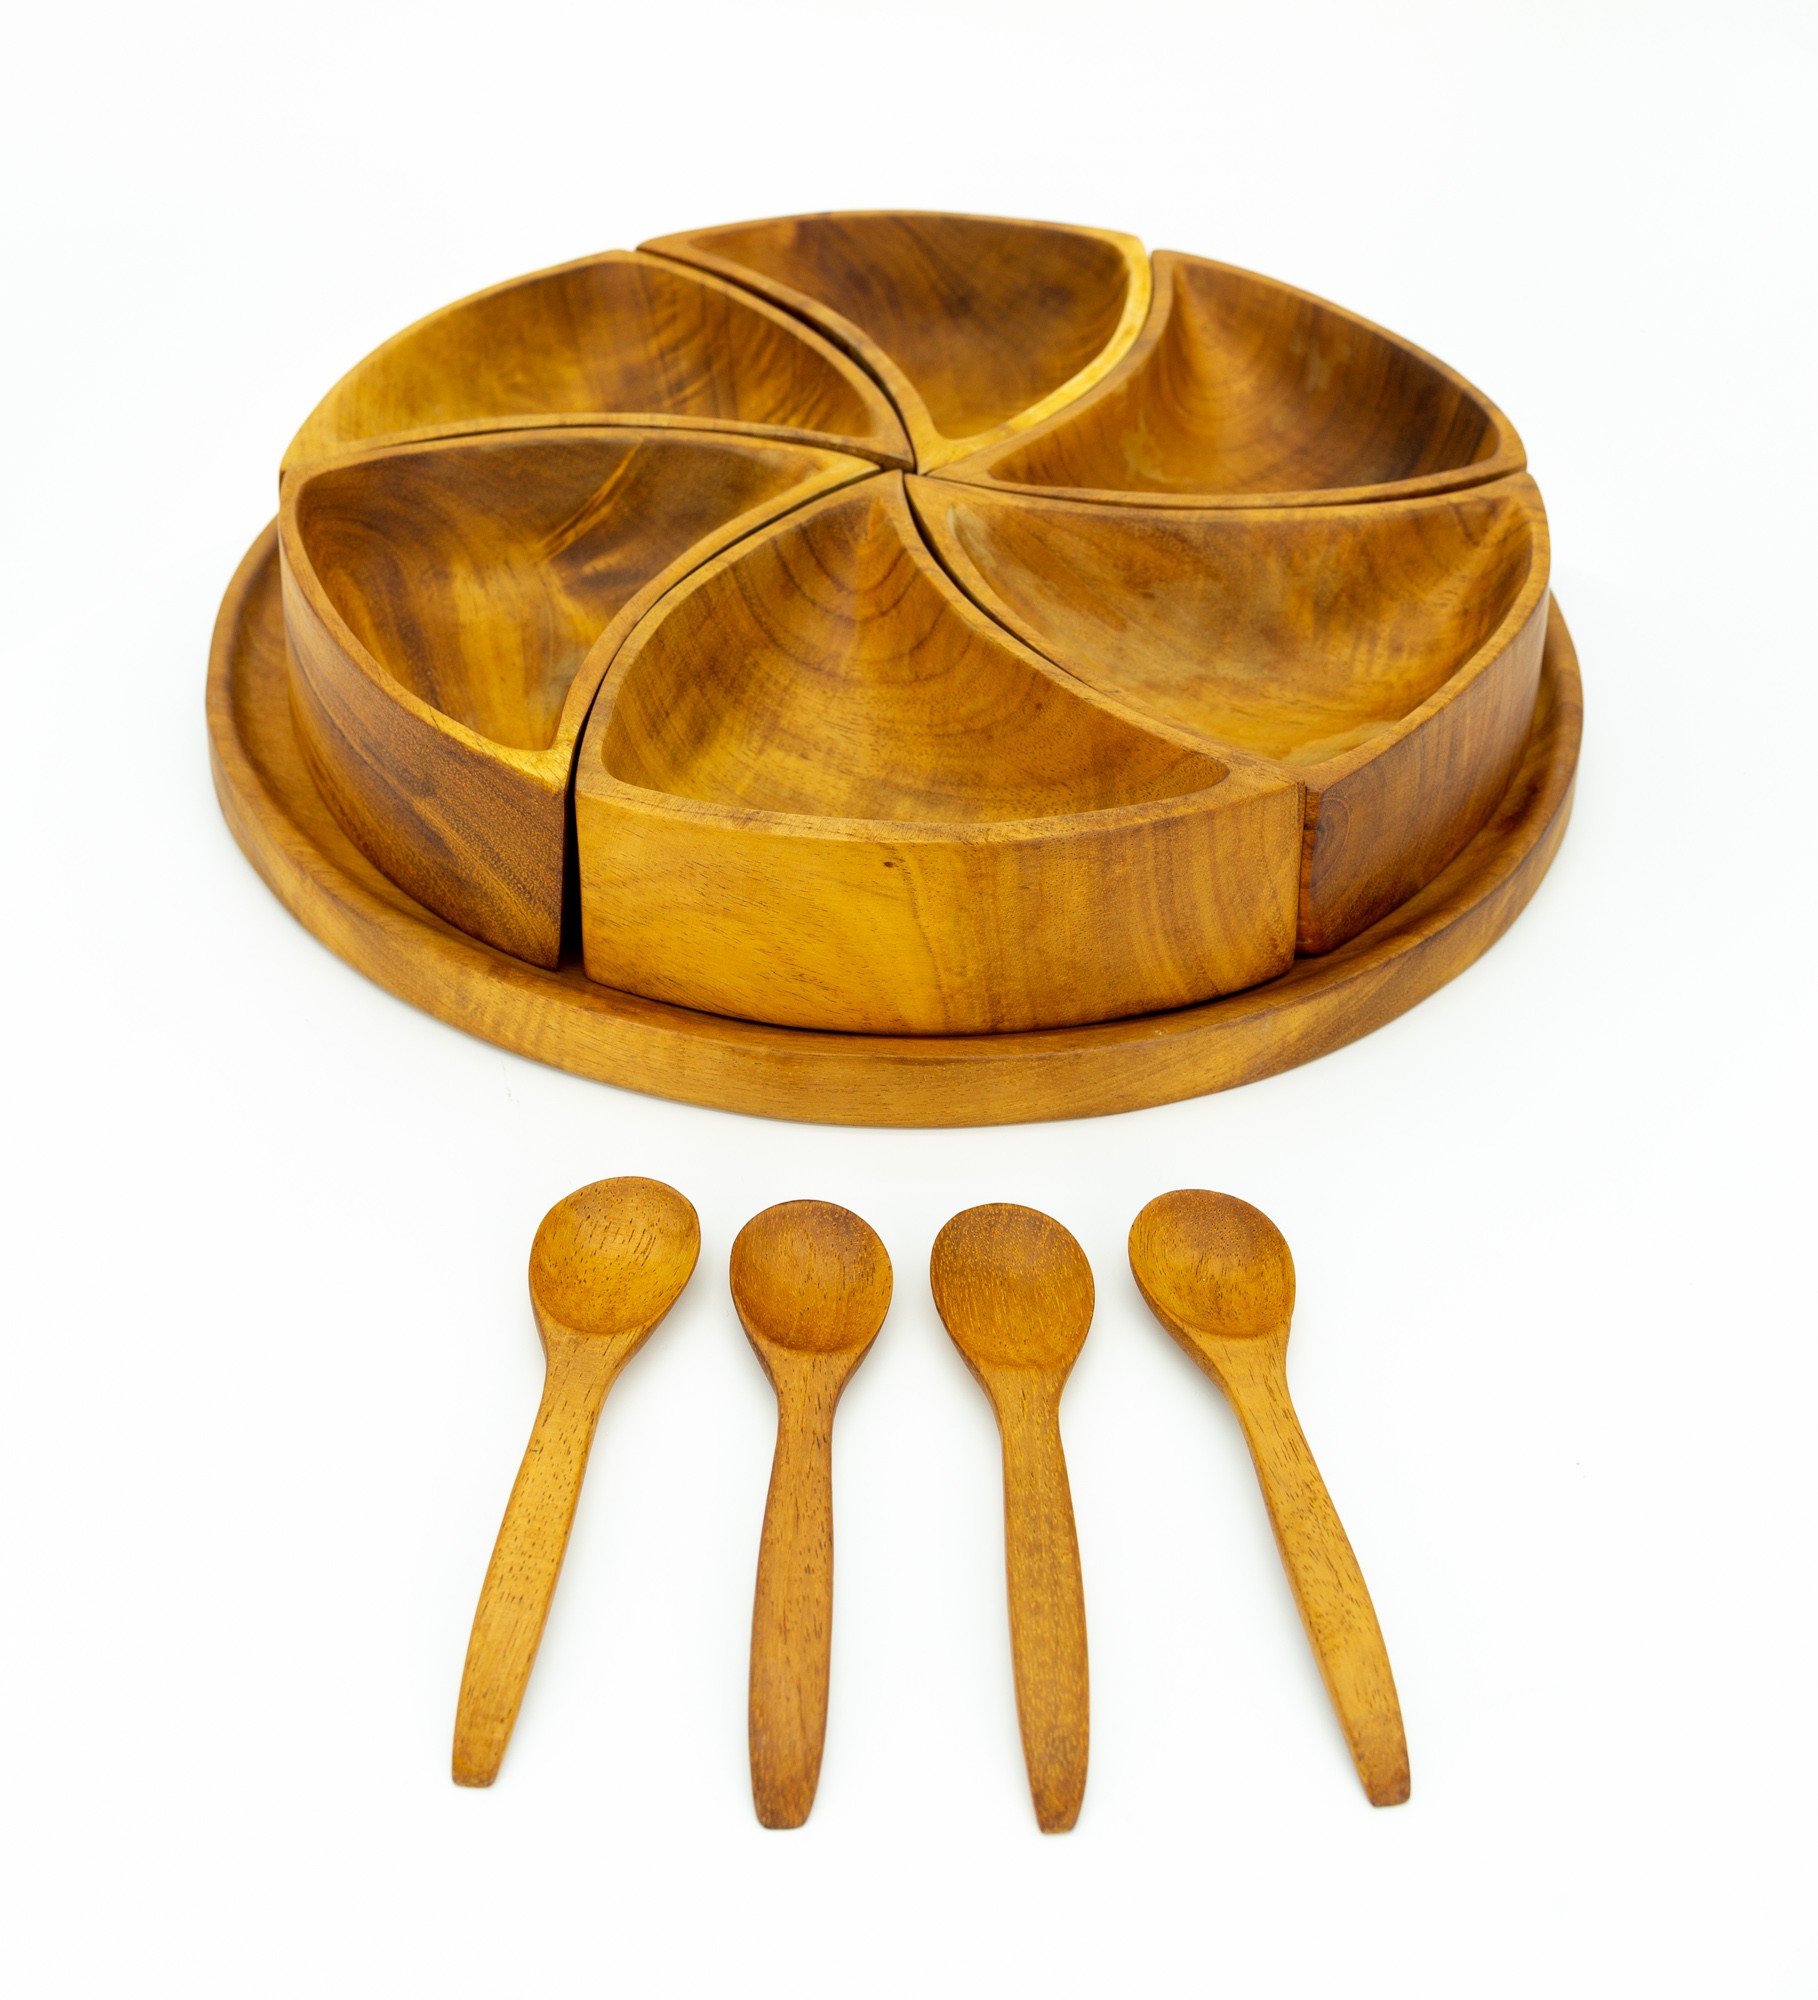 Lawrence Peabody Hand Carved Wood 11 Piece Mid Century Serving Set with Original Box